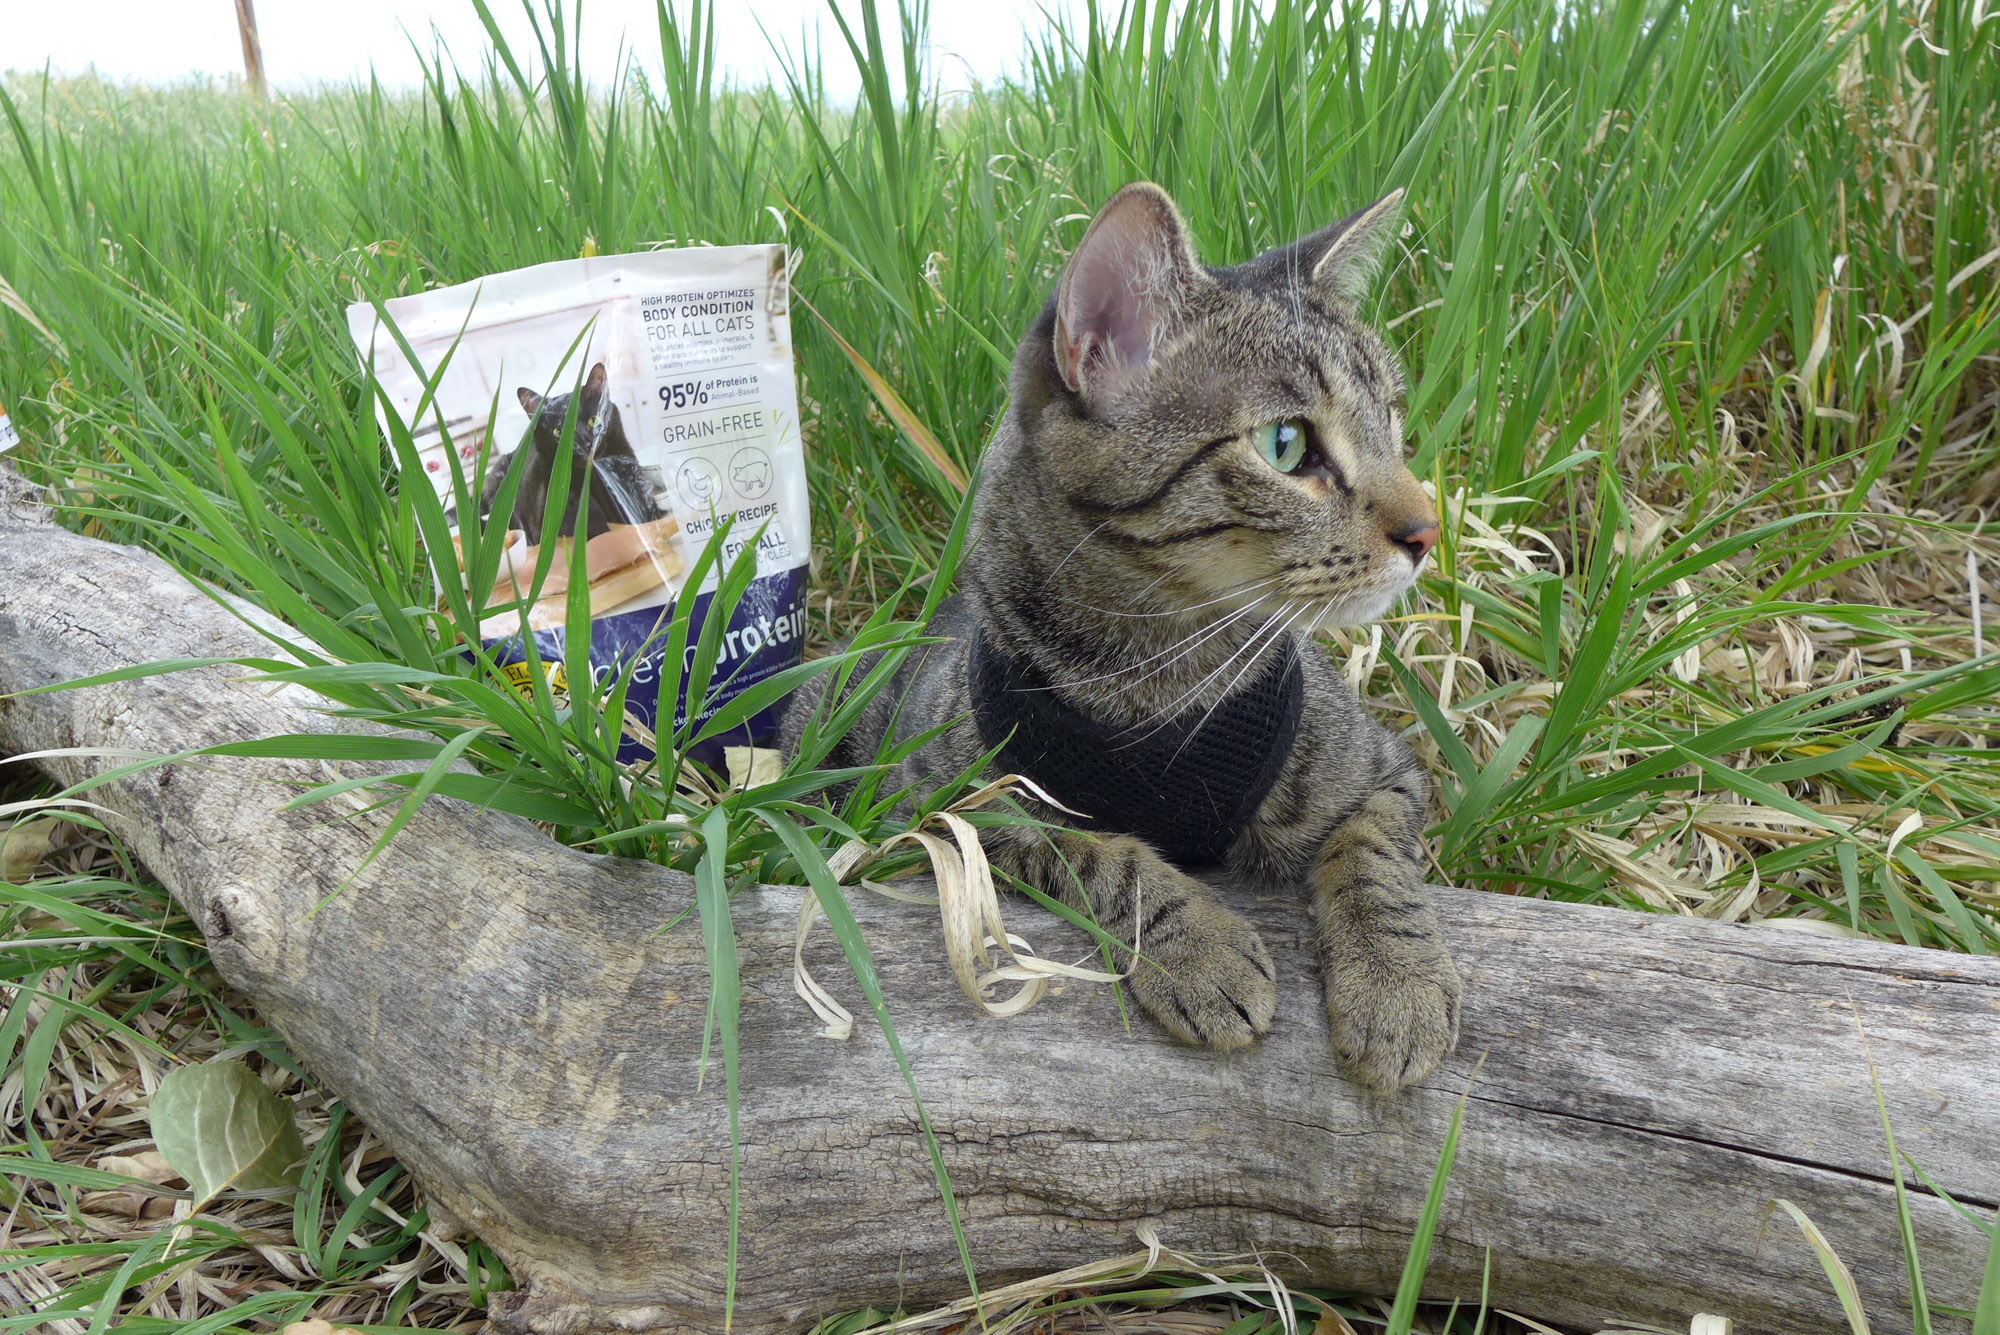 Dr. Elsey's cleanprotein cat food